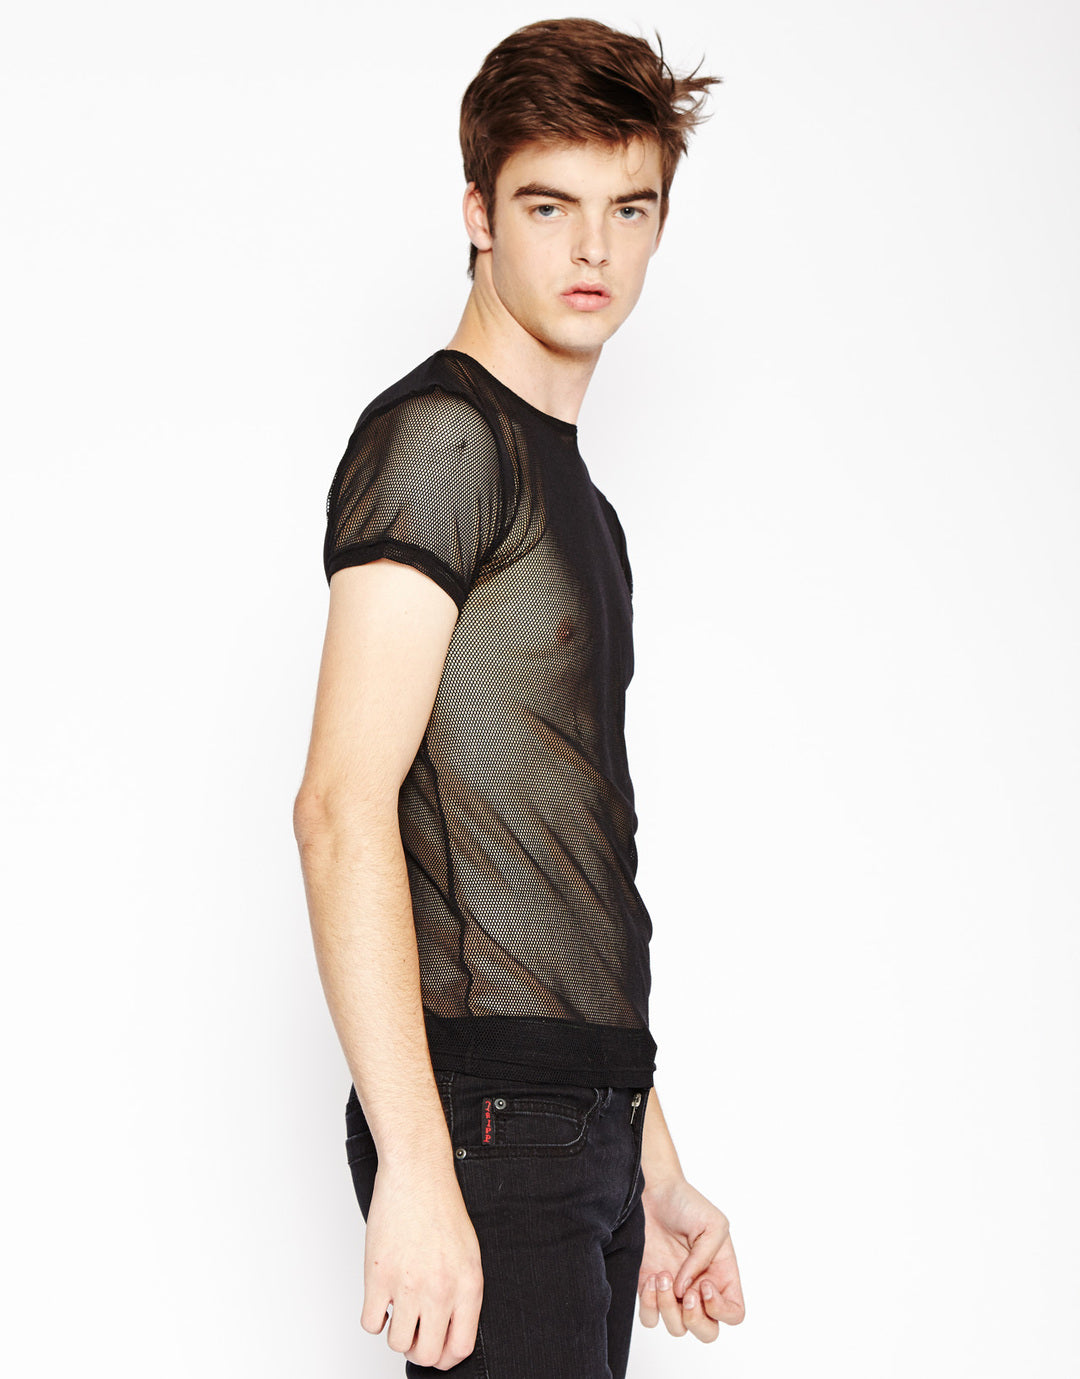 Model wearing the black Short Sleeve Fishnet T-Shirt with black pants, left side view.